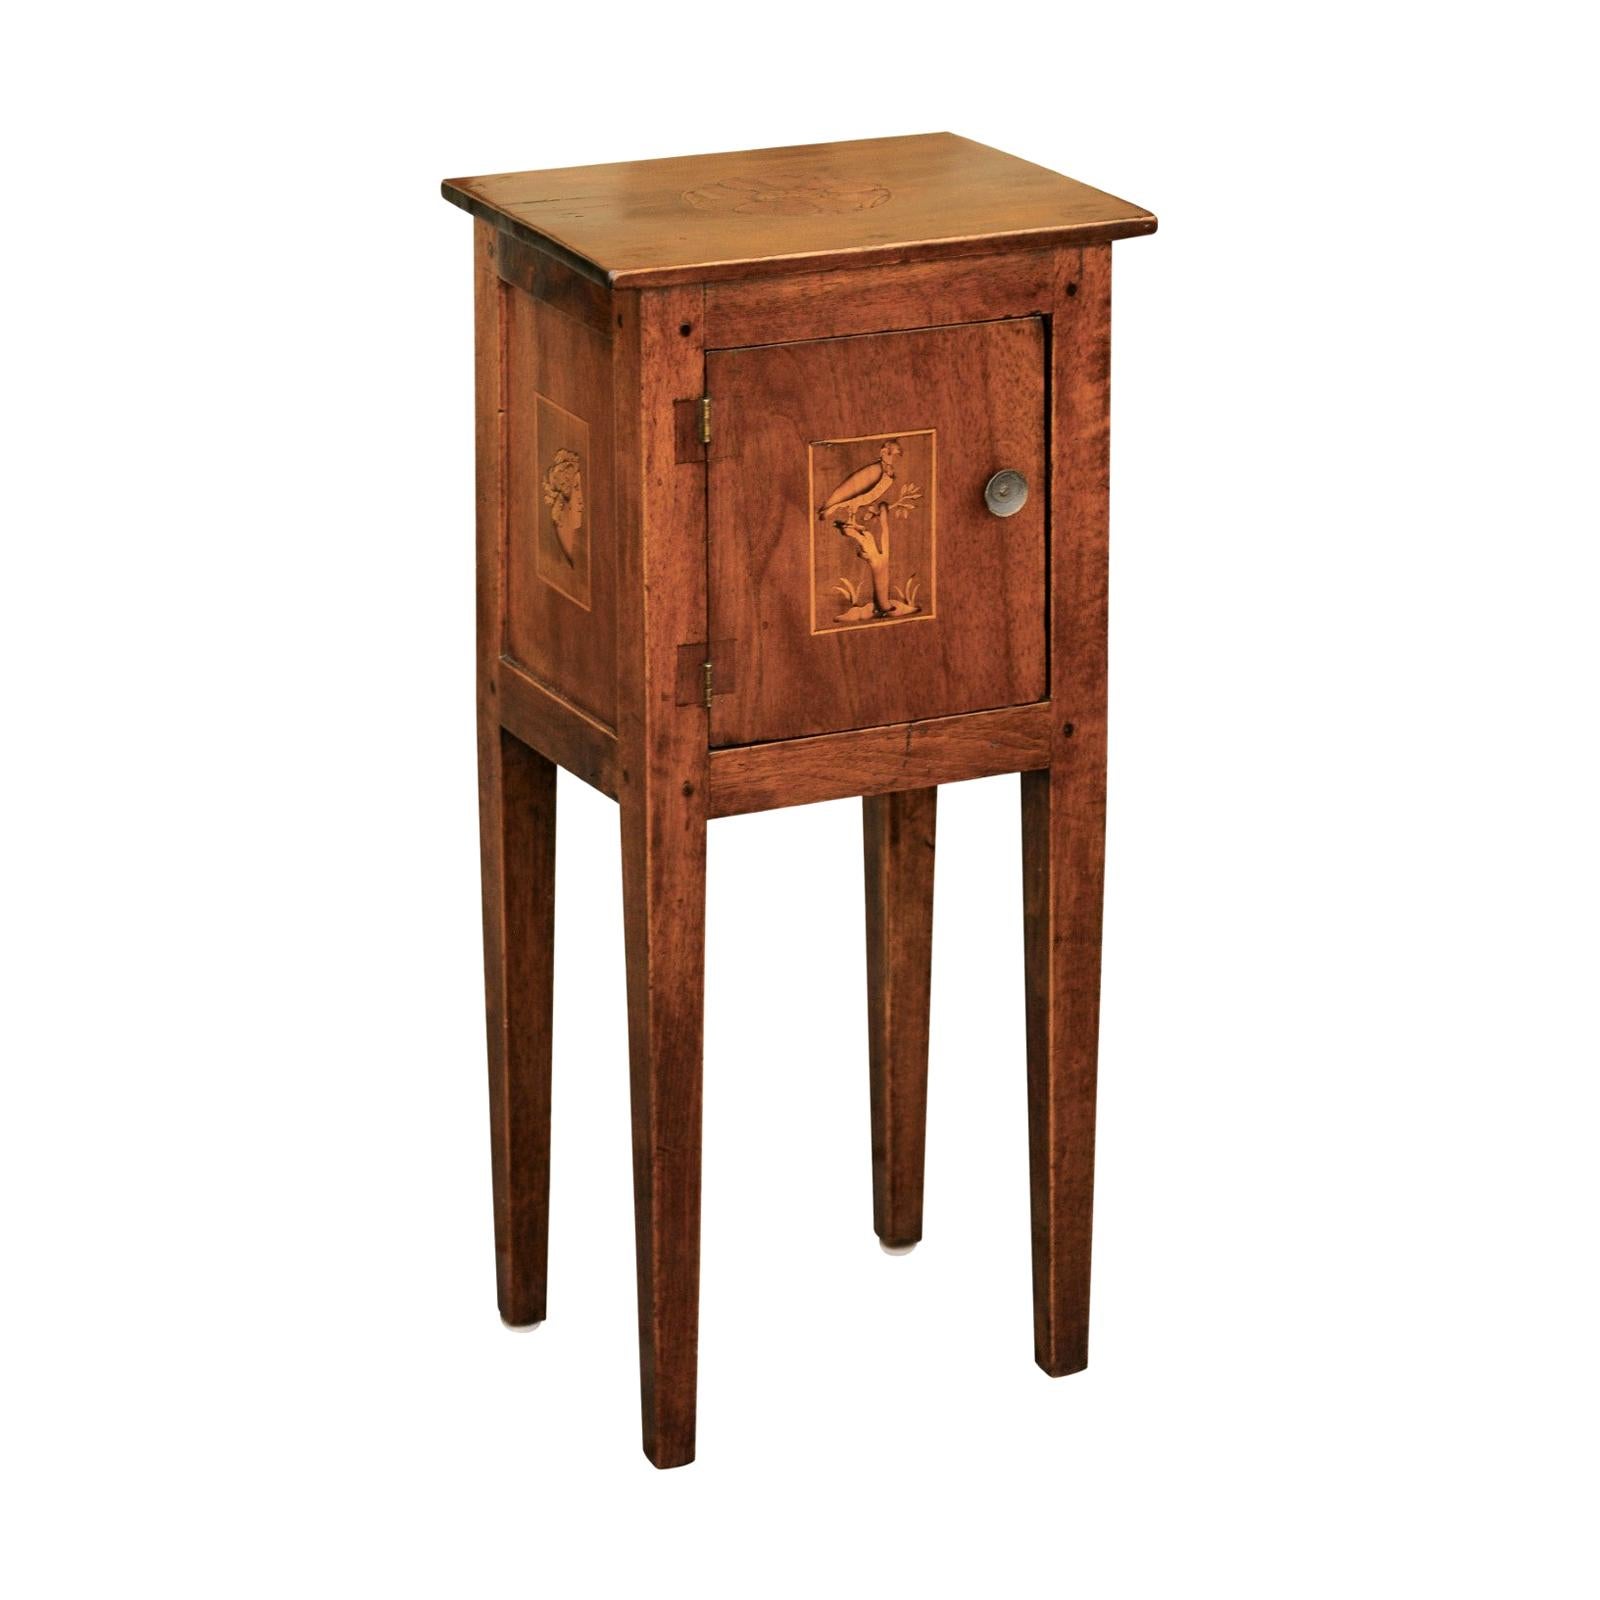 Italian, 1840s Neoclassical Style Walnut Nightstand Cabinet with Marquetry Décor